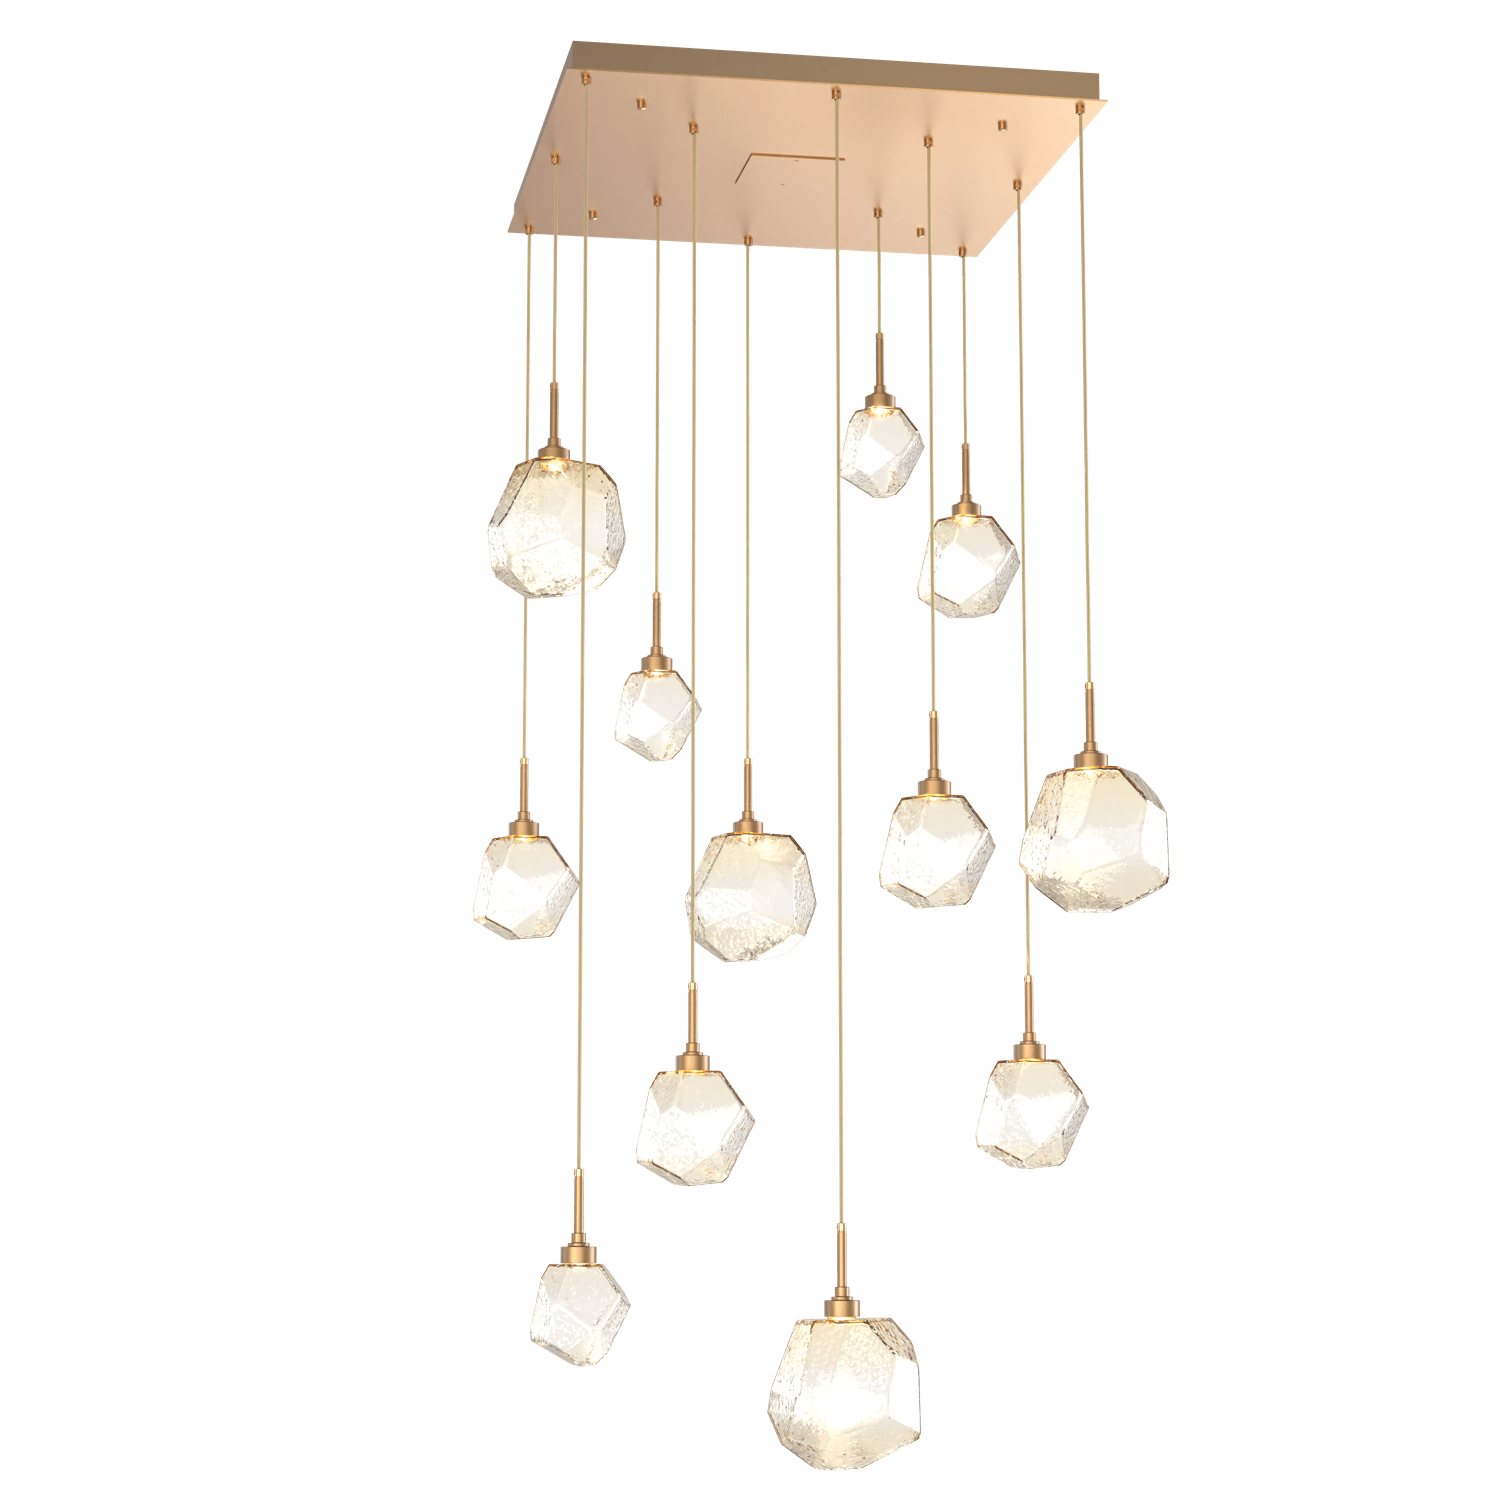 CHB0039-12-NB-A-Hammerton-Studio-Gem-12-light-square-pendant-chandelier-with-novel-brass-finish-and-amber-blown-glass-shades-and-LED-lamping